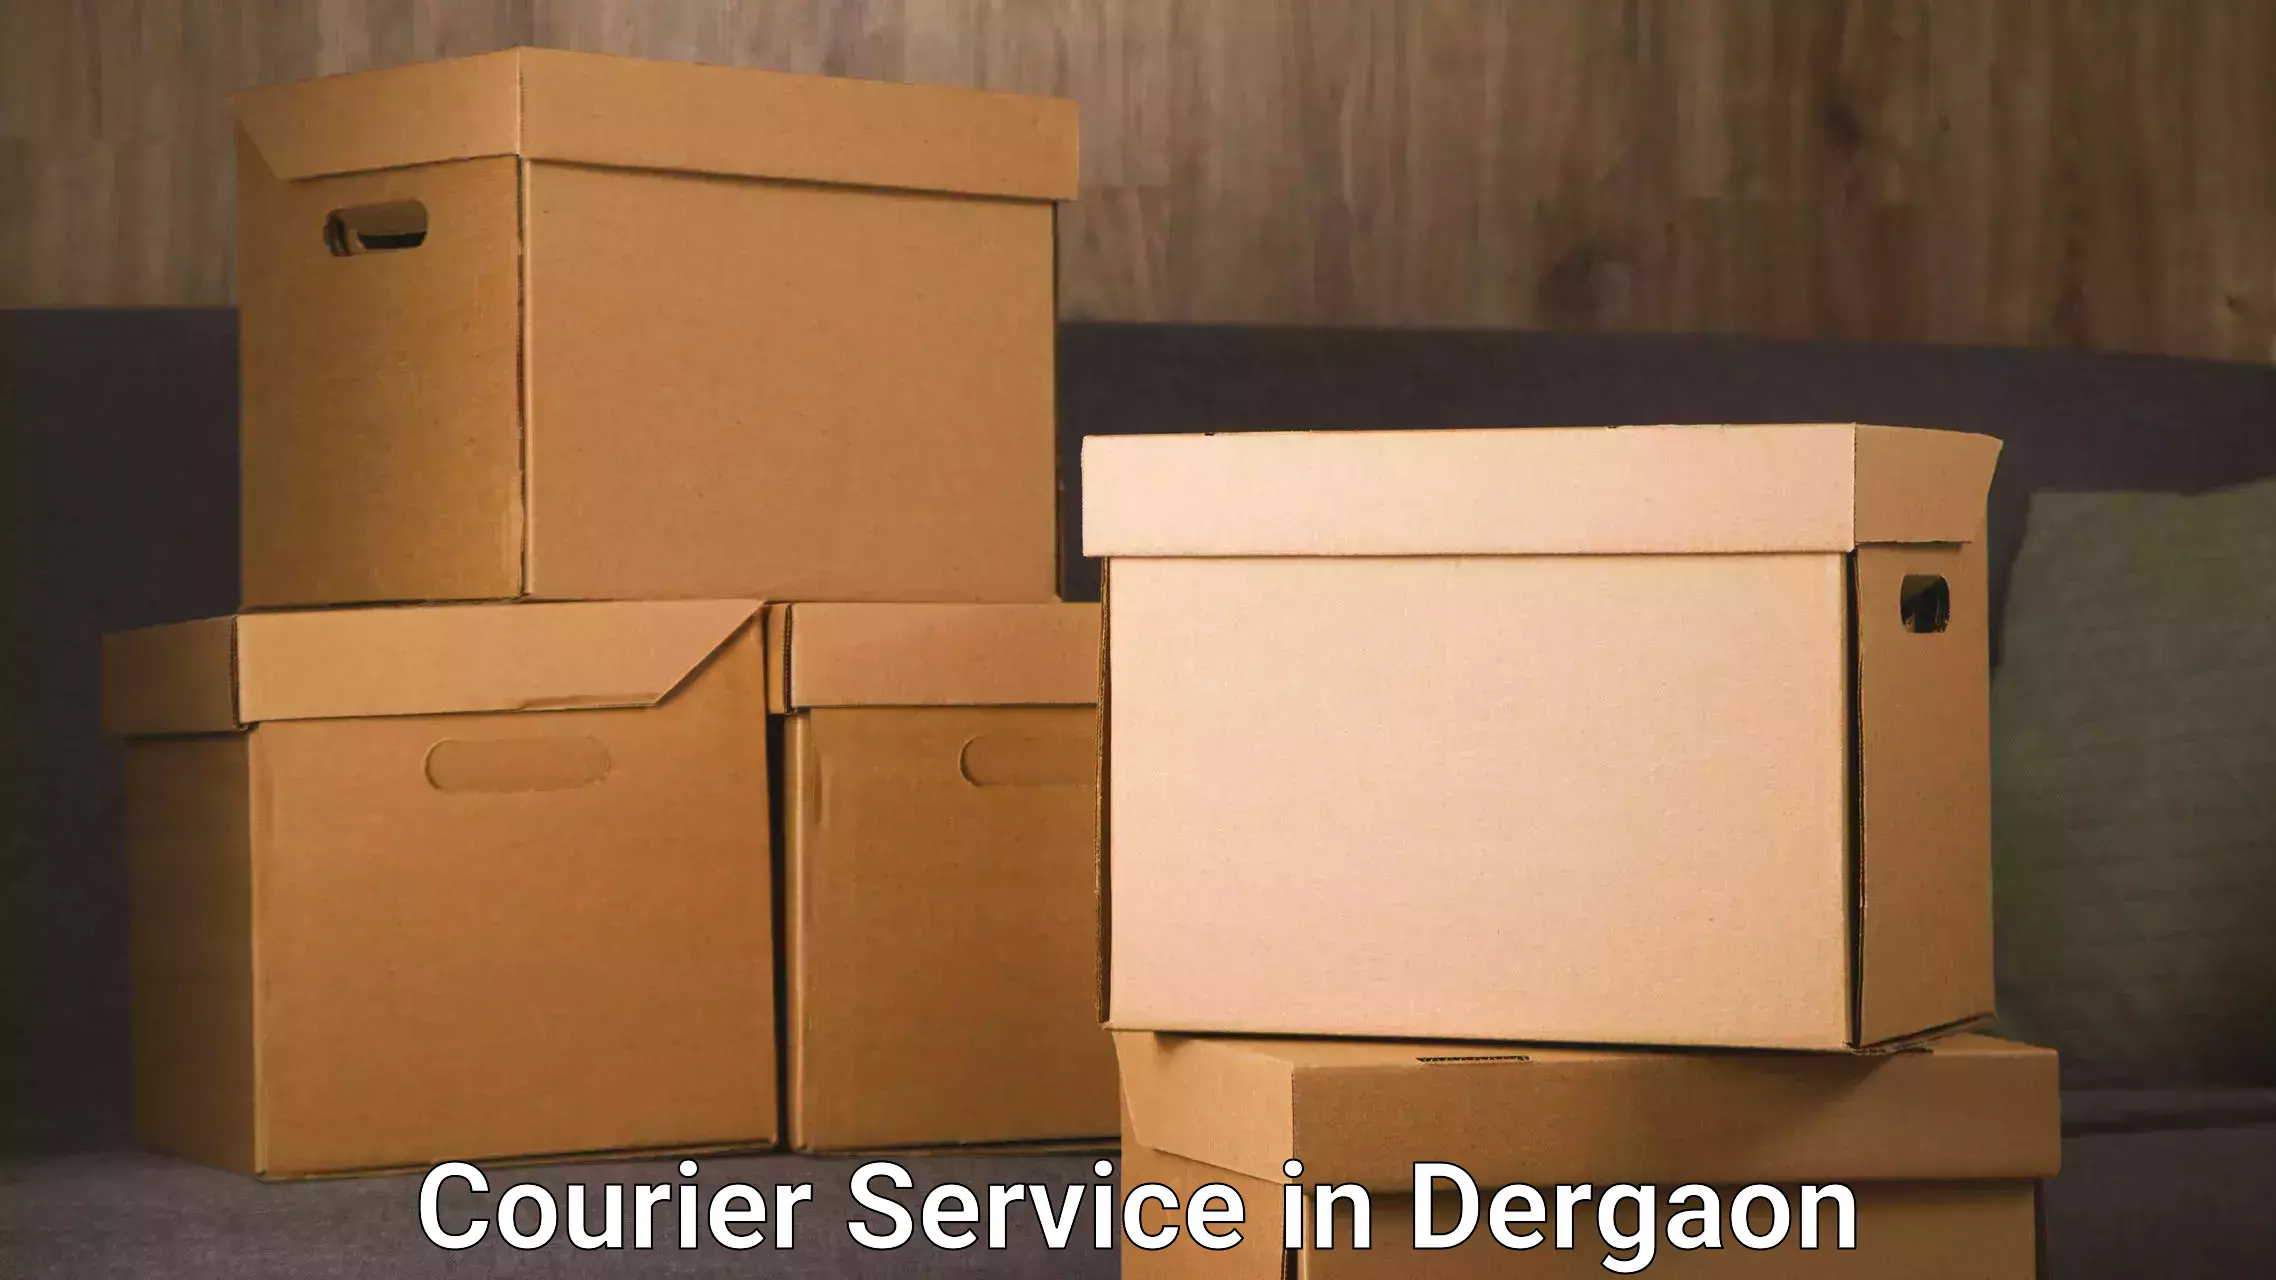 Comprehensive shipping network in Dergaon